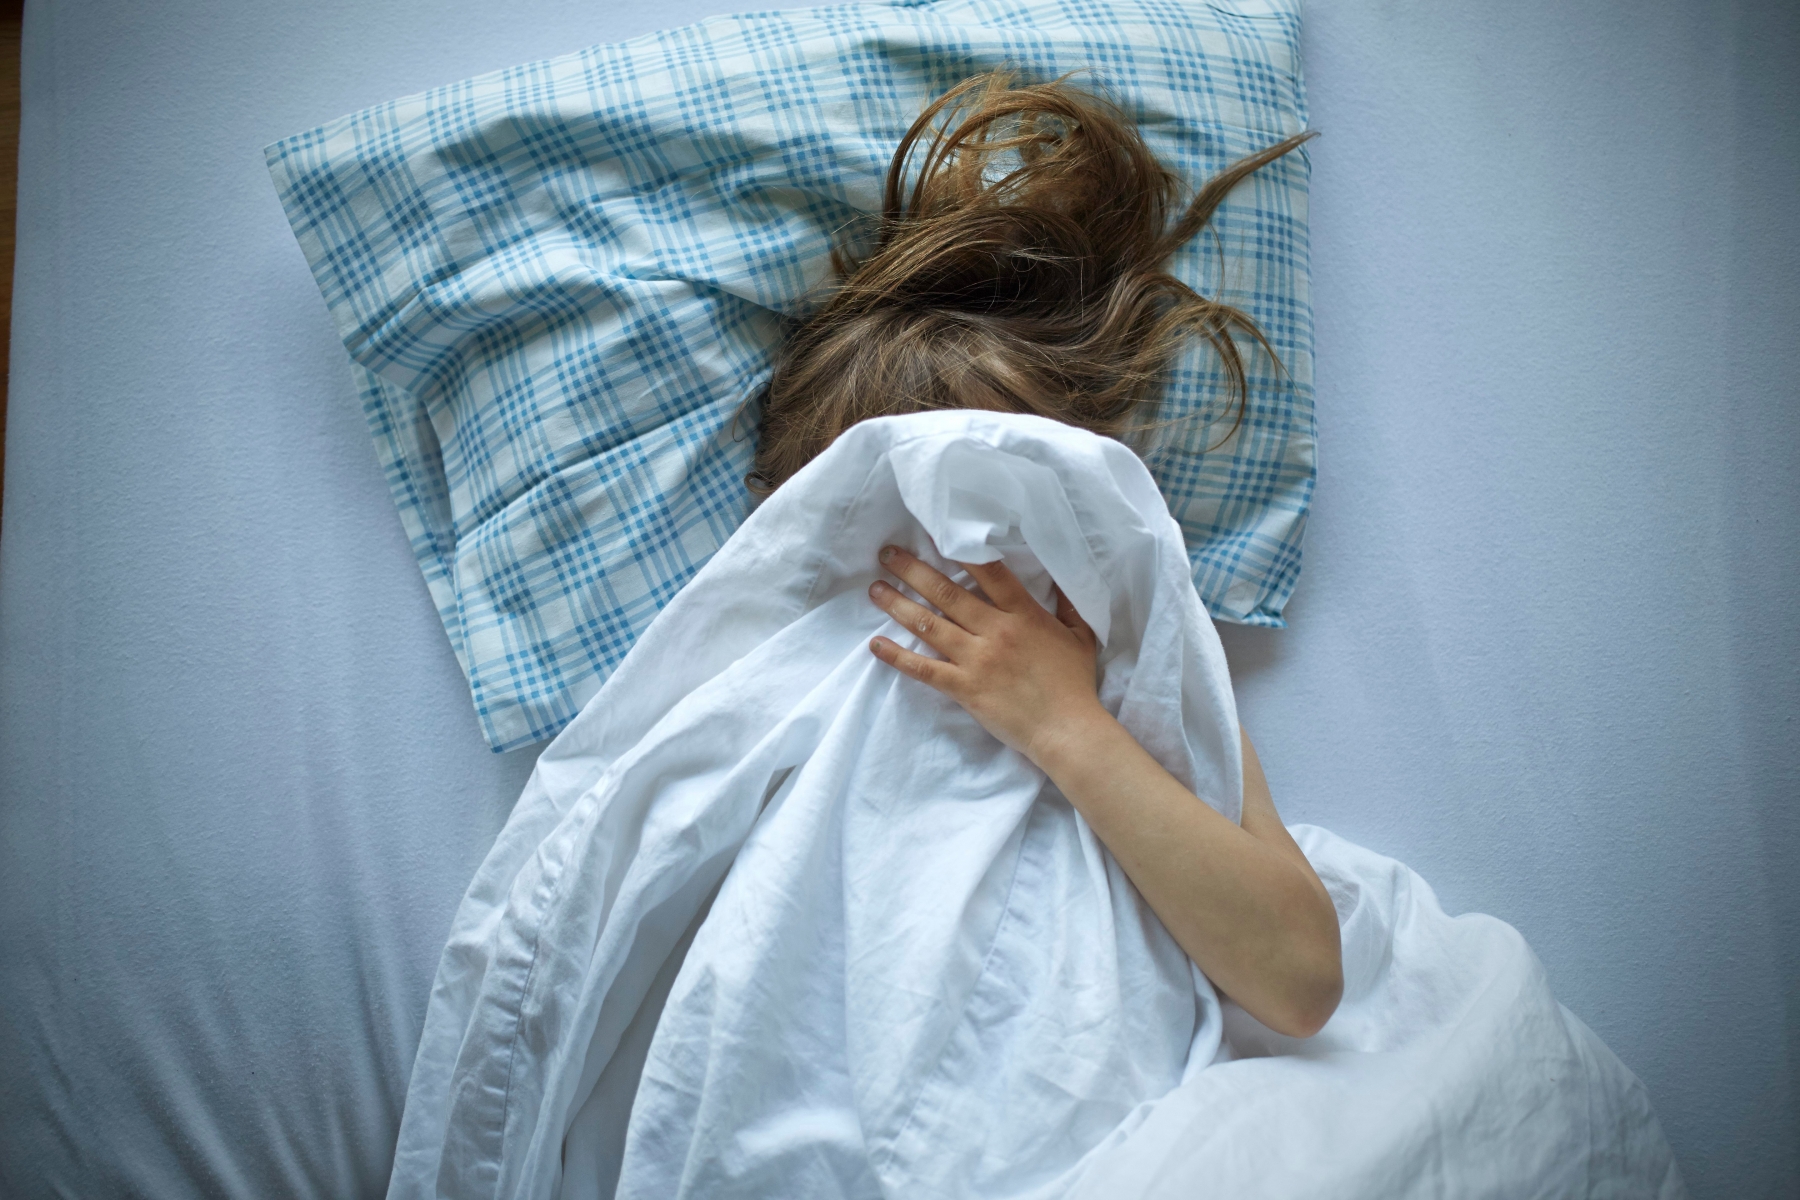 [ Symbolic Image, Posed Picture, Model Released ]  - Girl lying in a bed, hiding her face. - Girl, child, body, bed, crying, abused, hide, looking for understanding,    (Photo by KEYSTONE/Leo Thal) 



[ Gestellte Aufnahme, Symbolbild, Model Released ] Kindesmissbrauch, Kindsmissbrauch, Maedchen, Kind, Bett, Hilferuf, Schutz suchend,    (KEYSTONE/Leo Thal) SCHWEIZ KINDESMISSBRAUCH